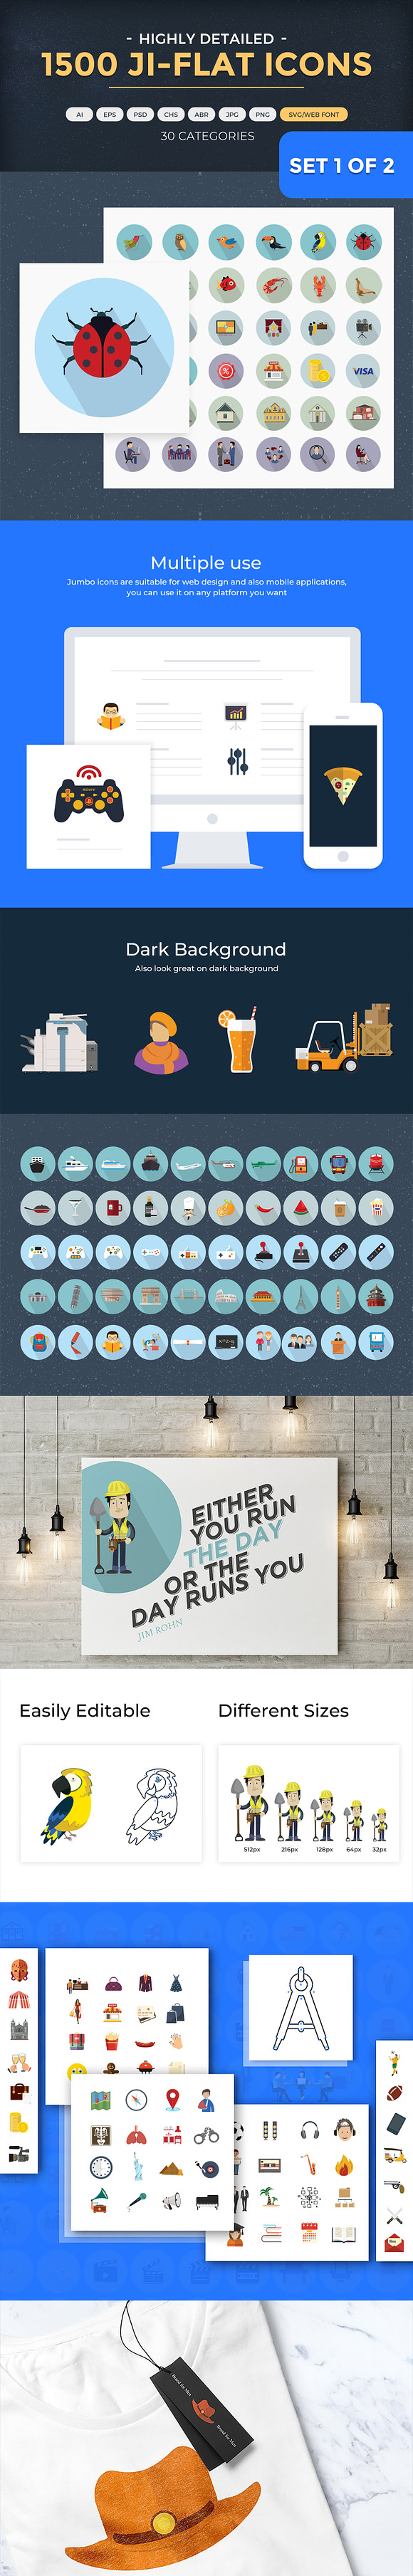 Jumbo Flat-Glyph Icons Set in Animal Emoticons - product preview 13